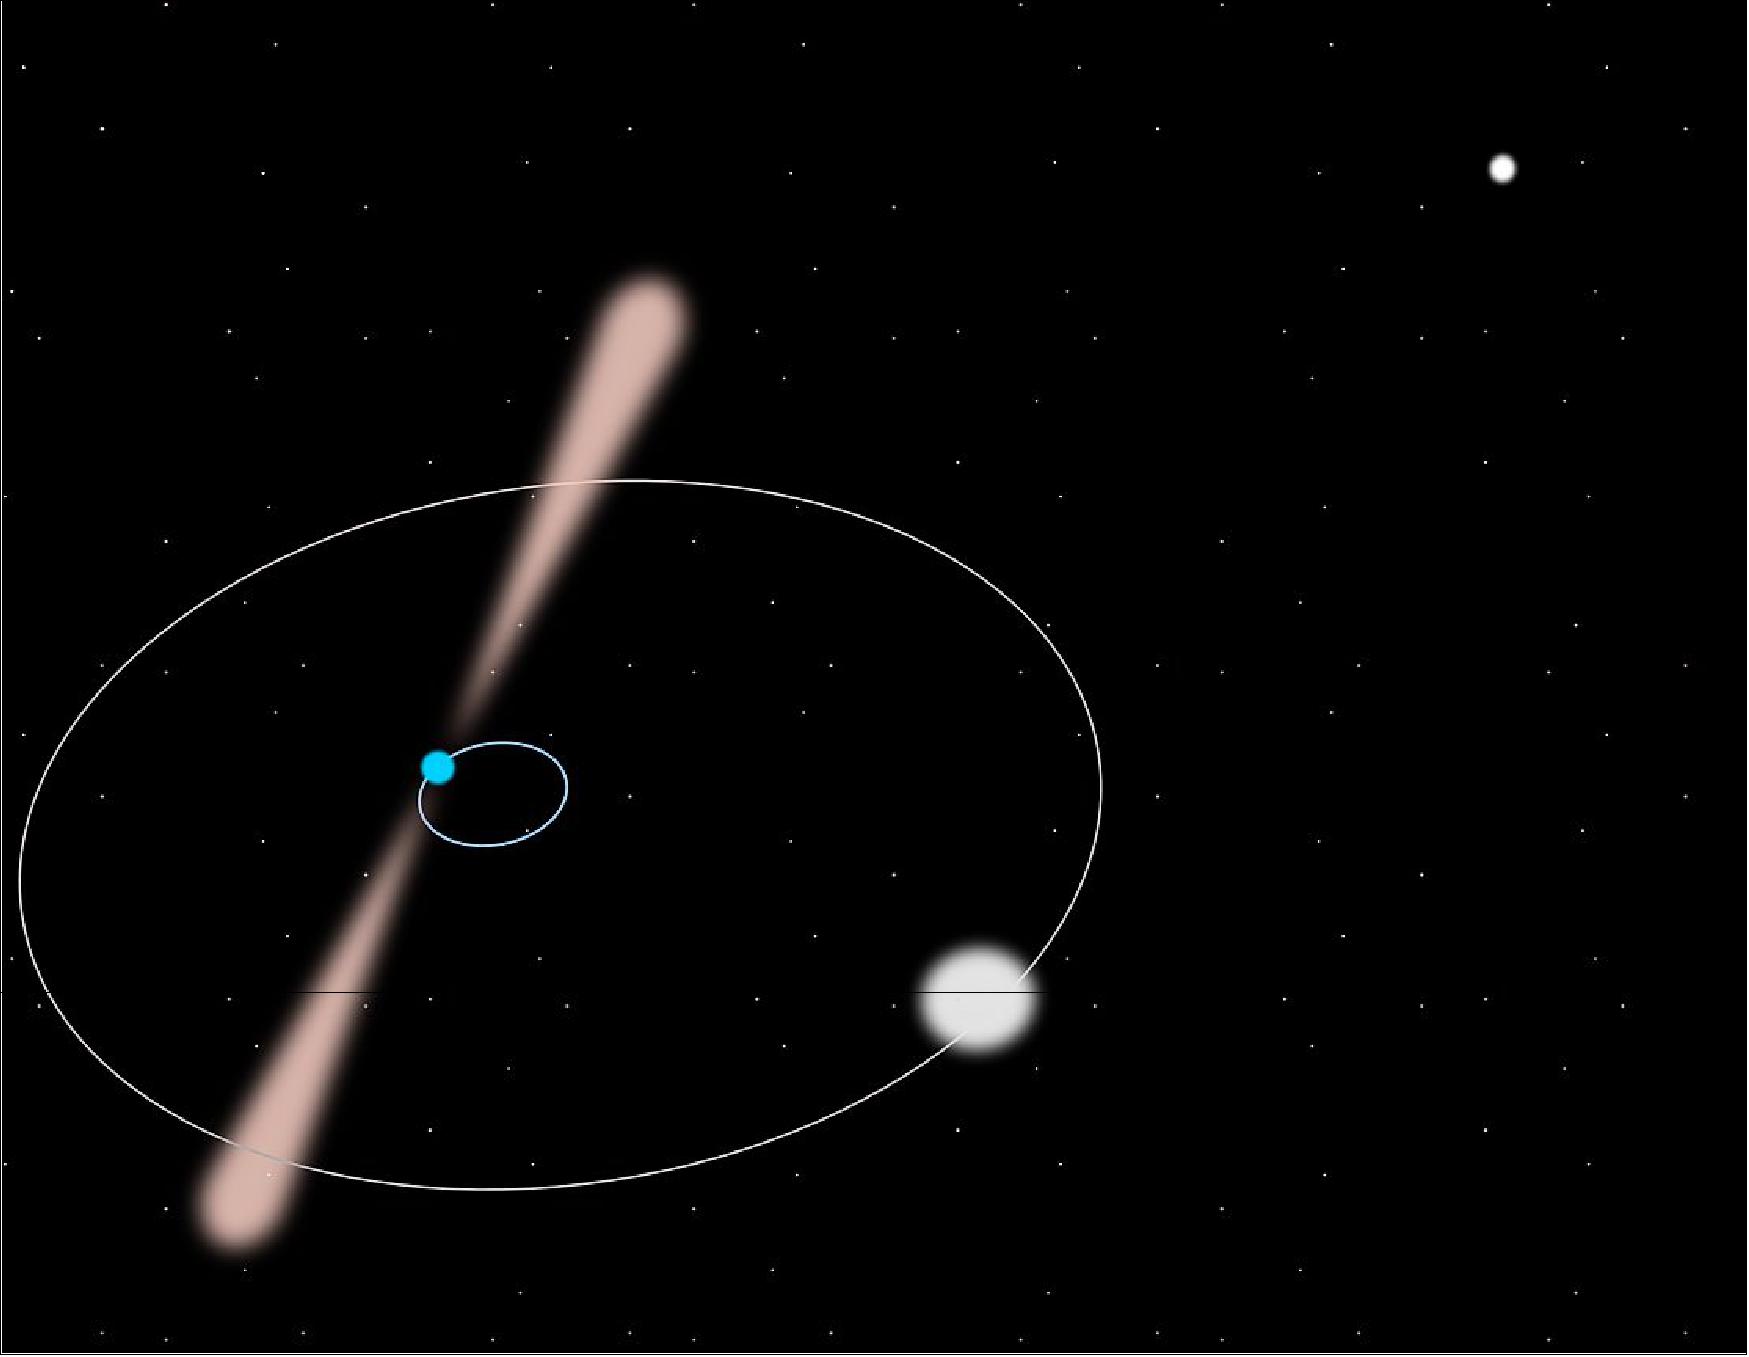 Figure 1: Artist view of the pulsar and its closest white-dwarf companion with their orbits and the second companion in the background. The system is not to scale. (image credit: Guillaume Voisin CC BY-SA 4.0)